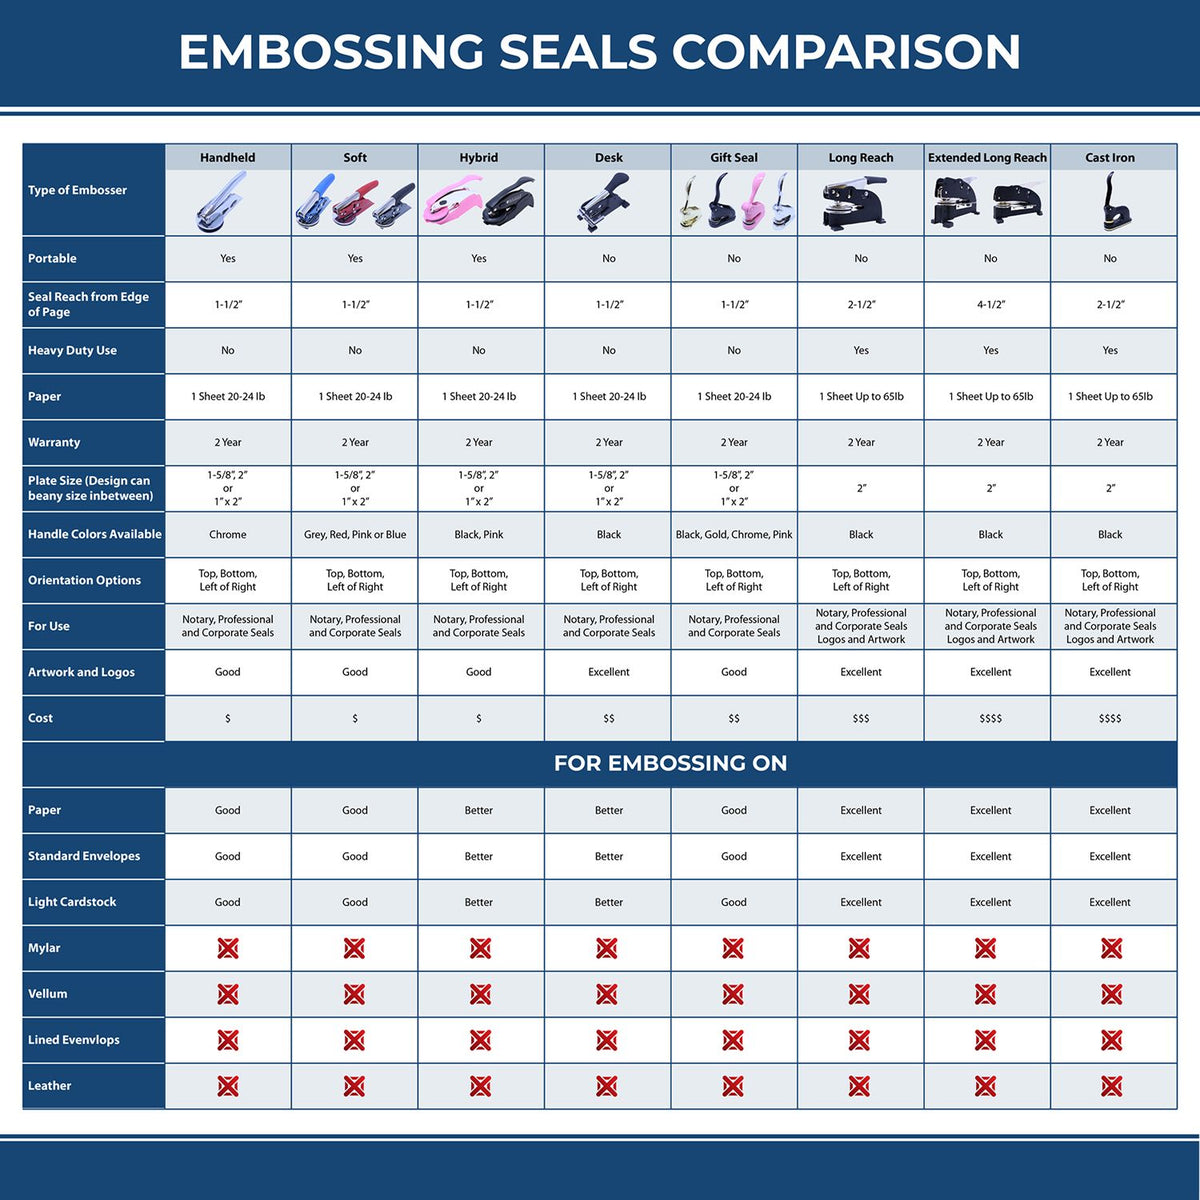 A comparison chart for the different types of mount models available for the Handheld District of Columbia Architect Seal Embosser.